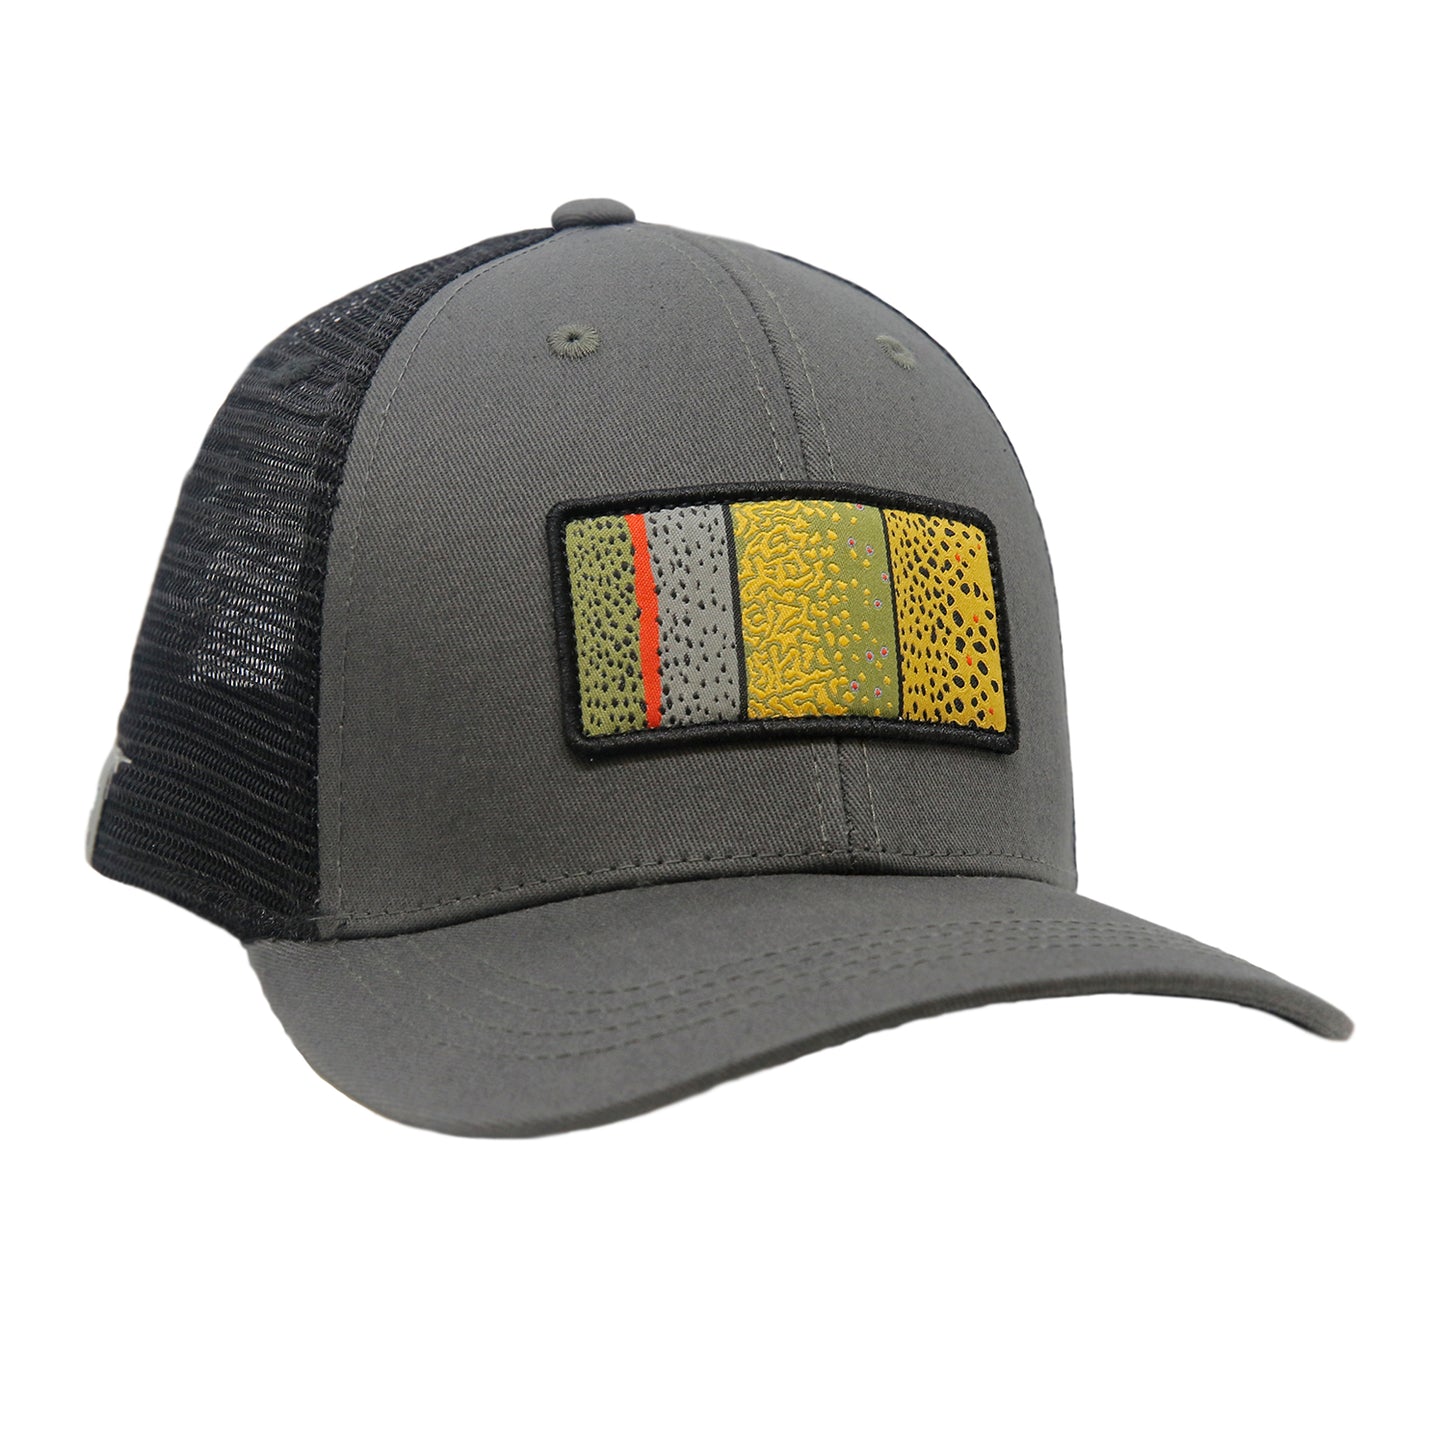 A hat with gray fabric in front and black mesh in back has a patch featuring trout skin of rainbow brook and brown trout